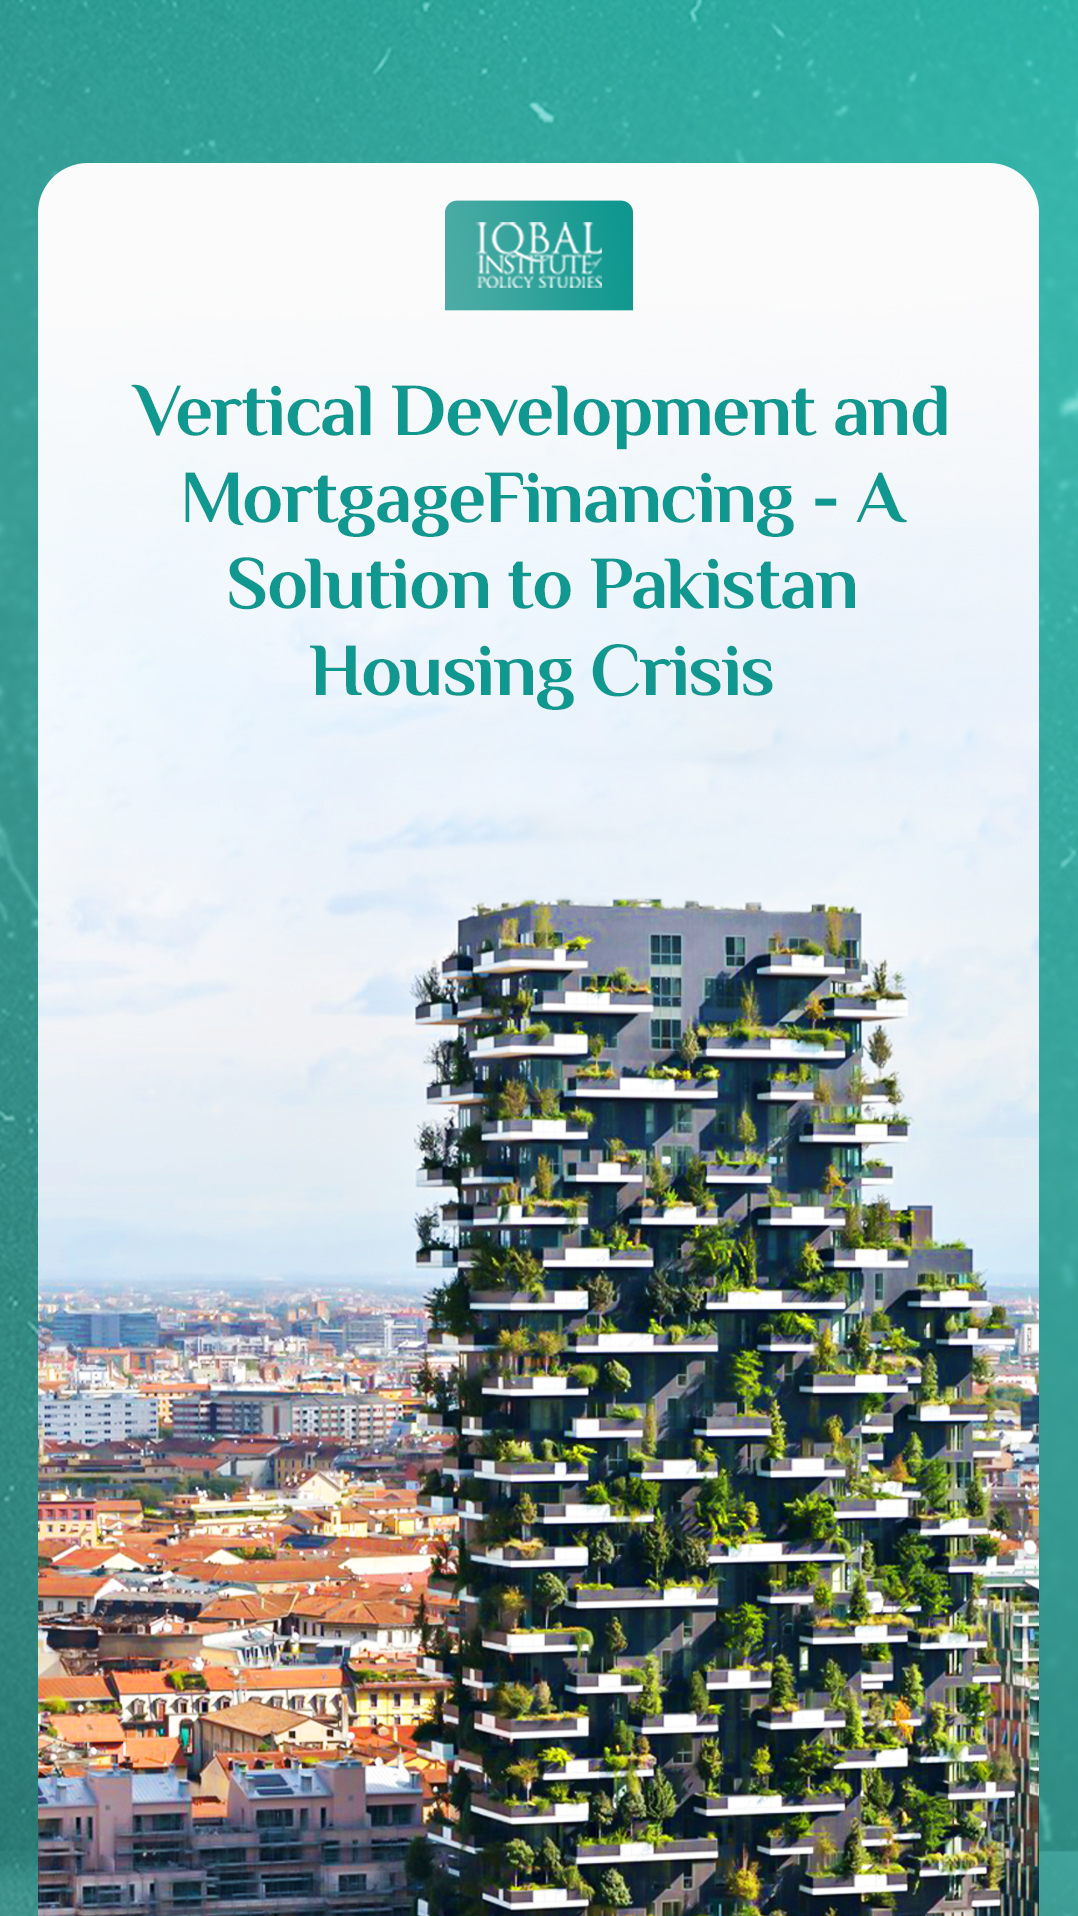 Vertical development and mortgage financing - A solution to Pakistan housing crisis